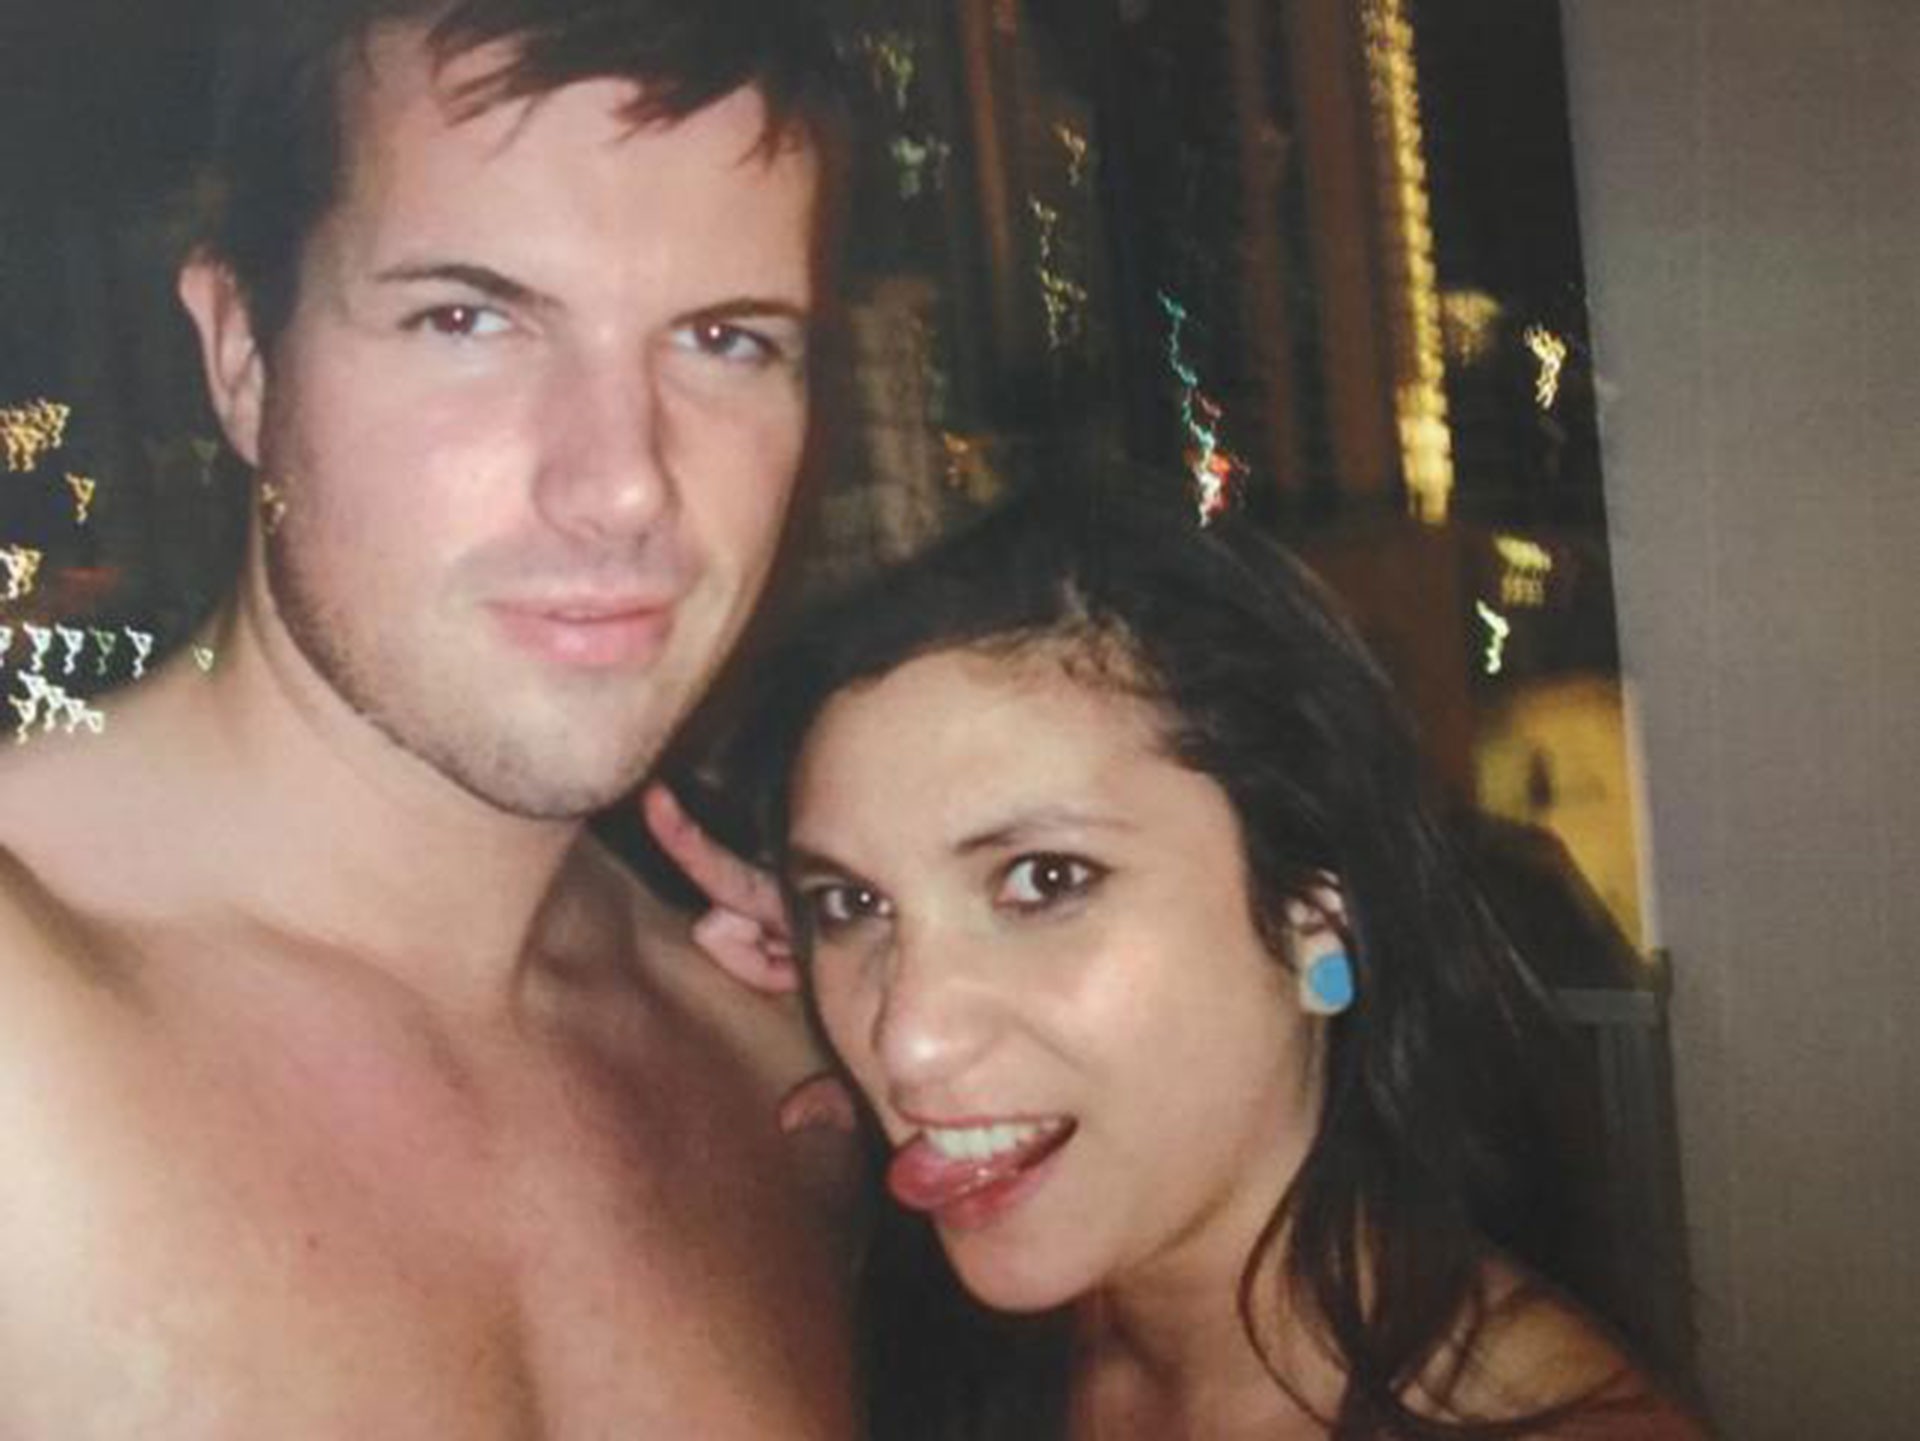 Gable Tostee appears to have resurfaced on Tinder